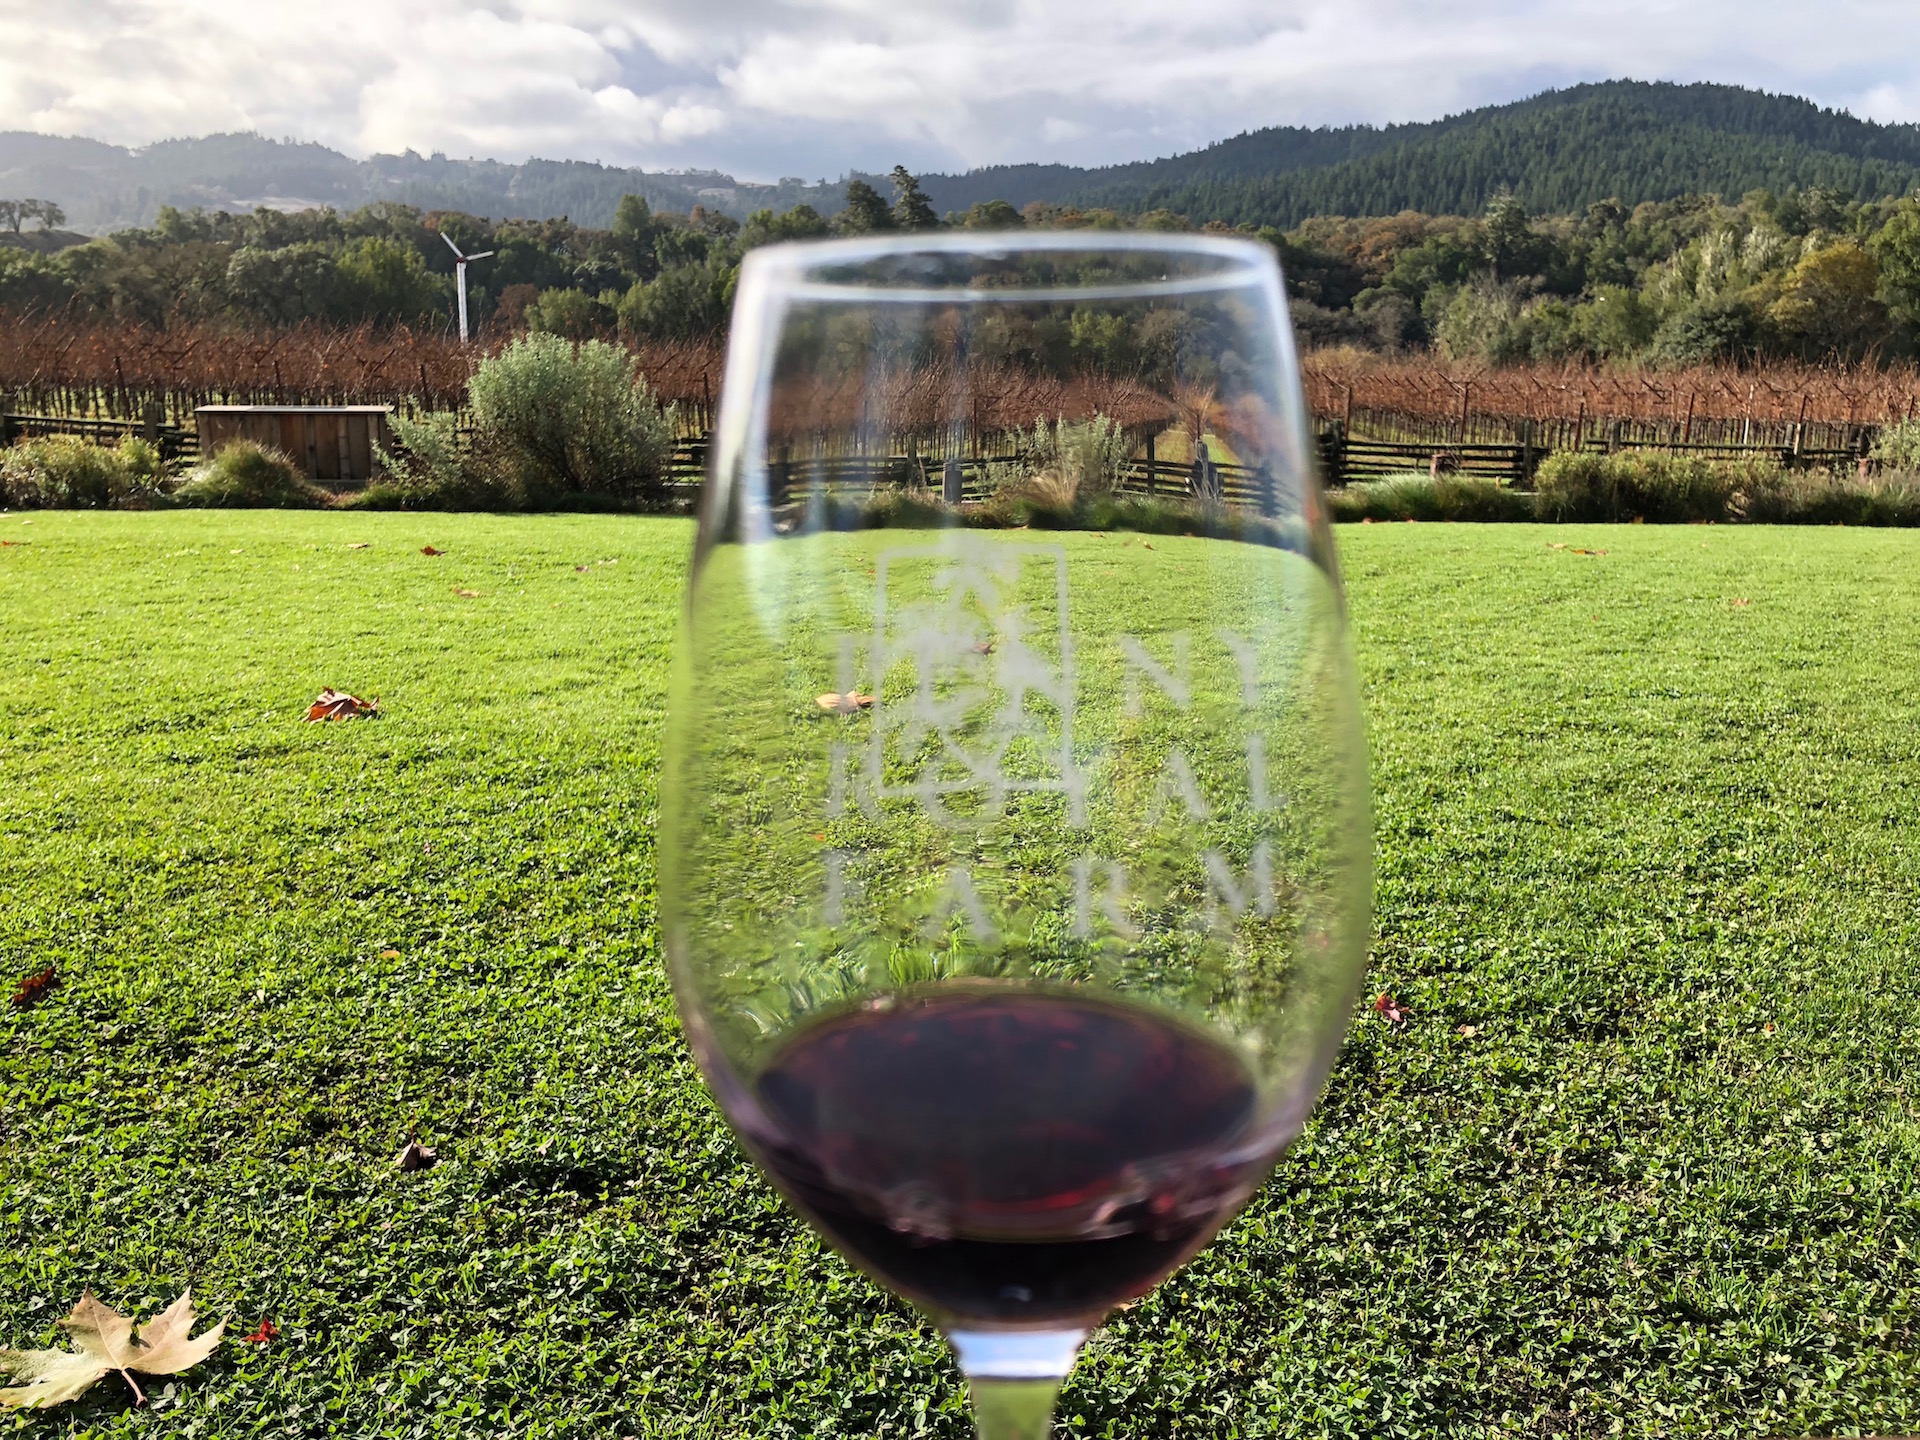 Goat cheese, Pinot Noir and spectacular views at the Anderson Valley’s Pennyroyal Farm